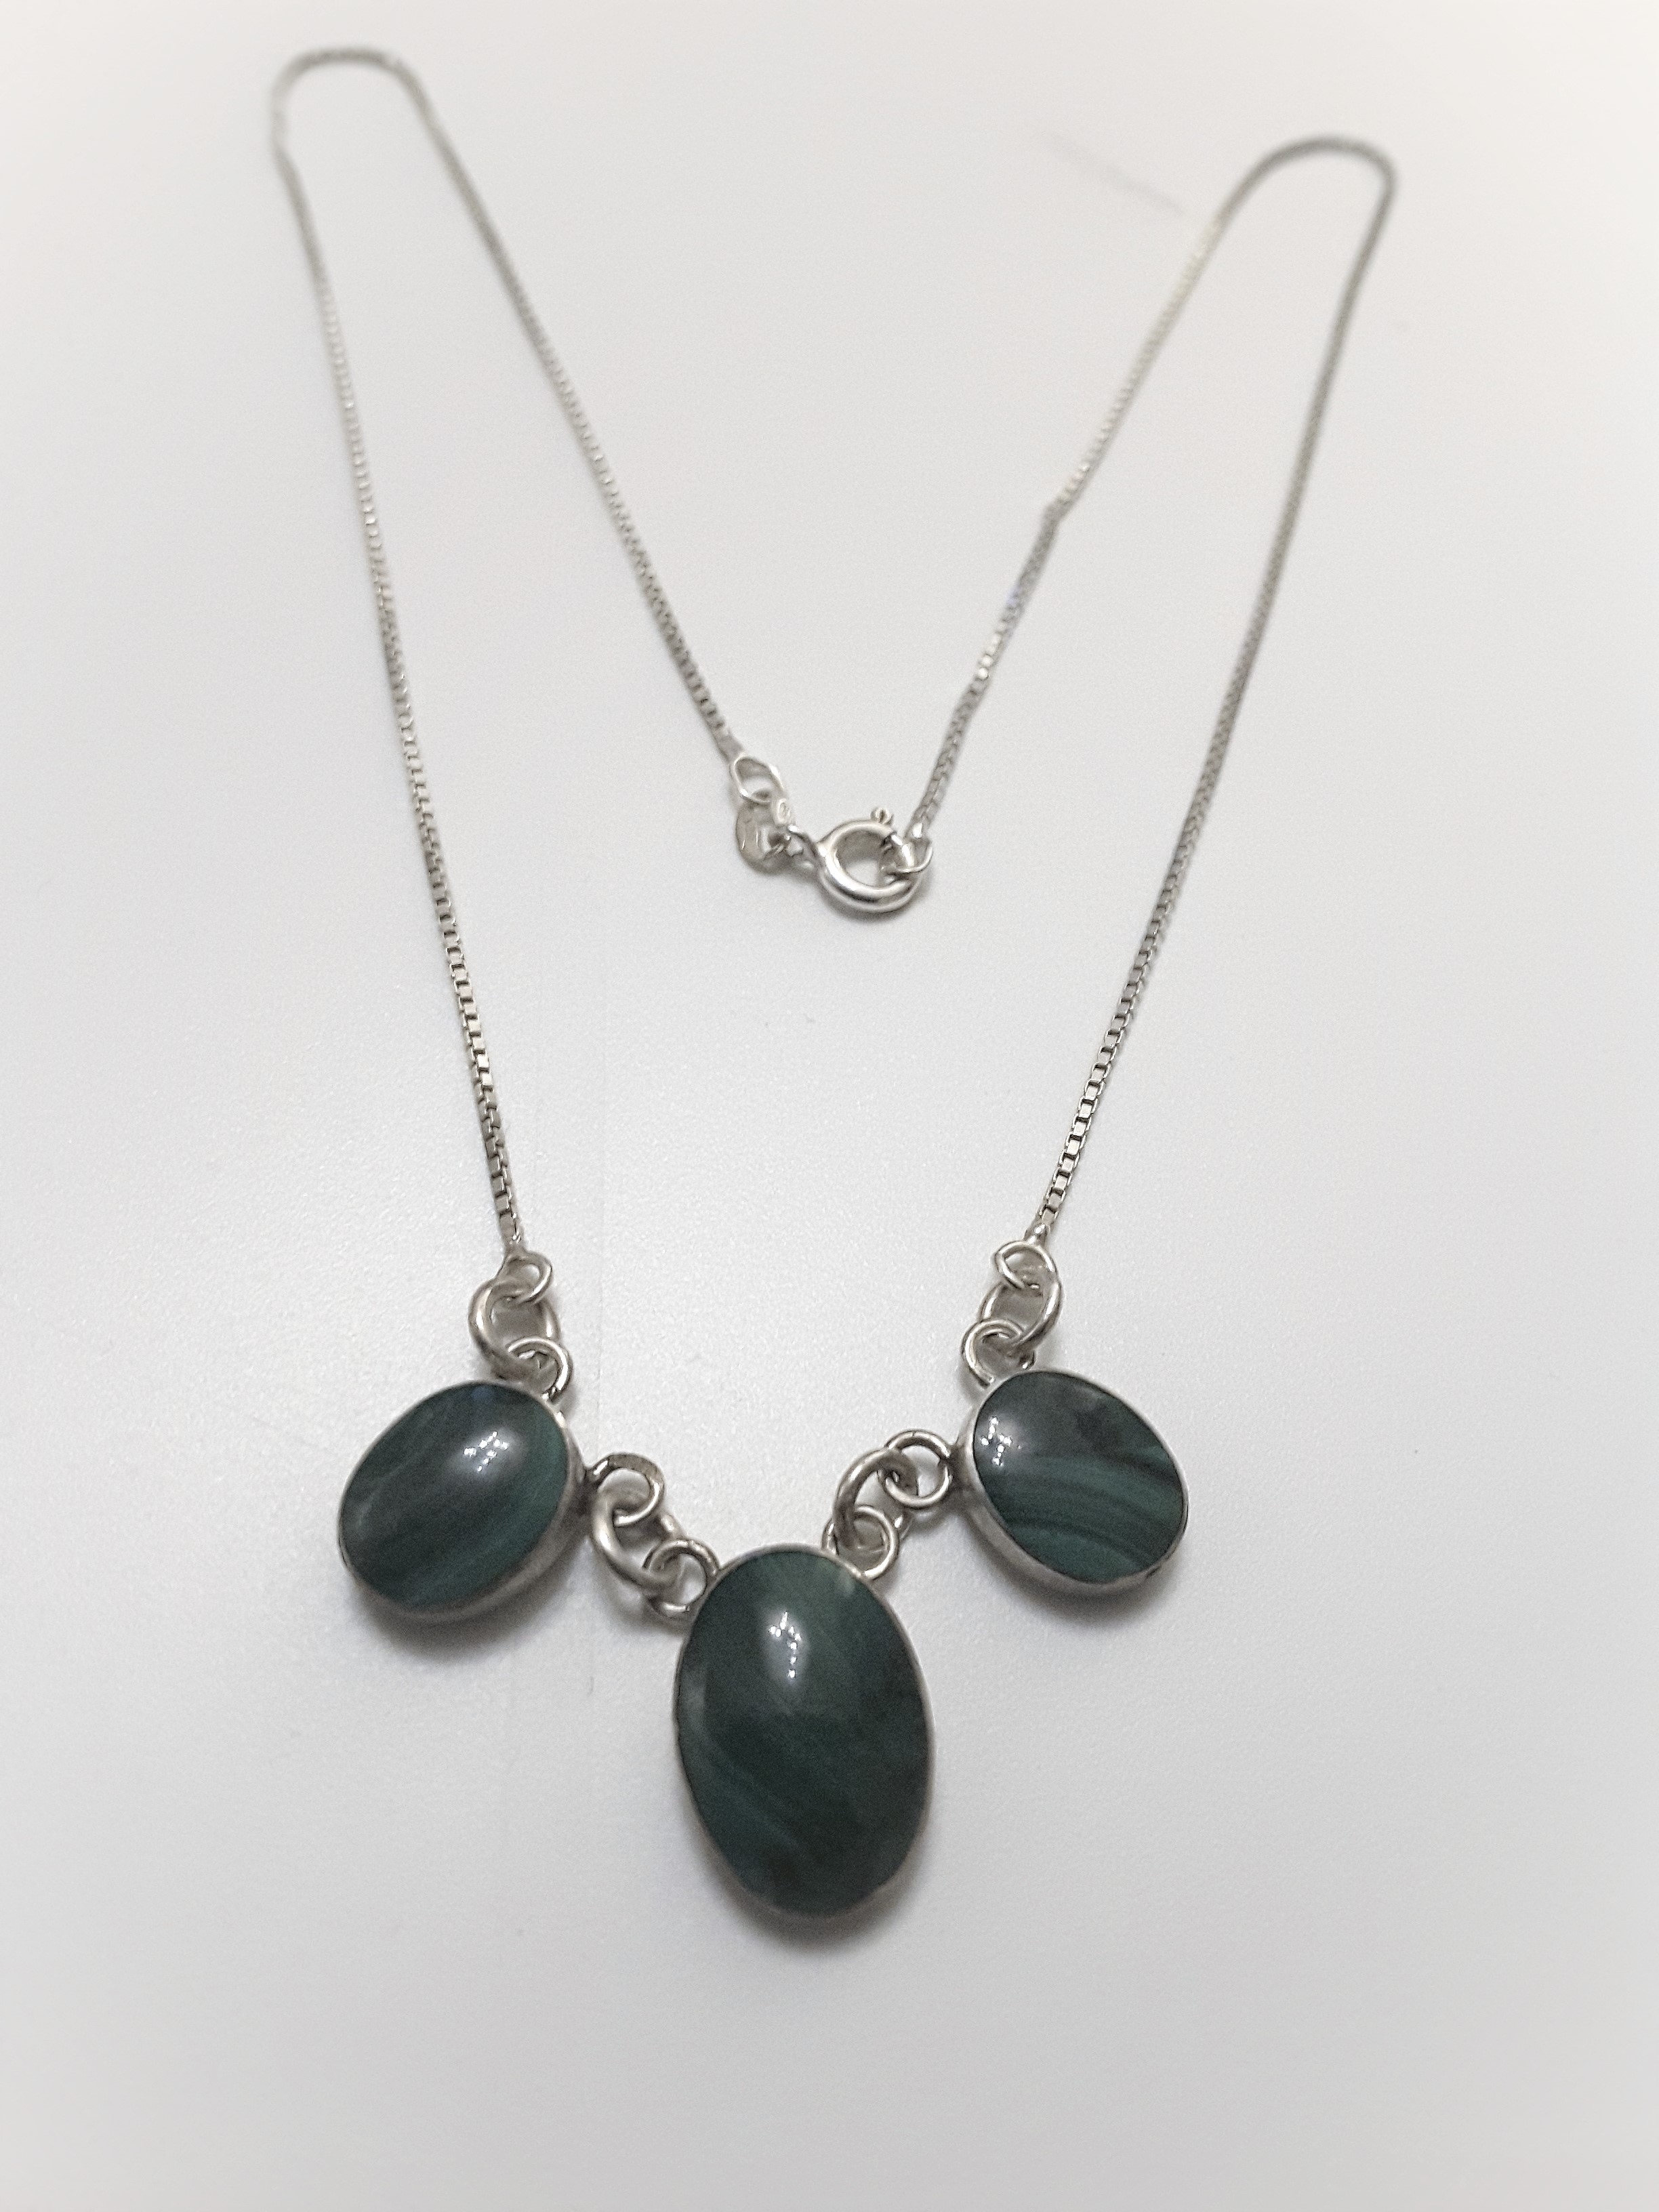 Molino Italian Silver Necklace With Green Stones - Image 3 of 4